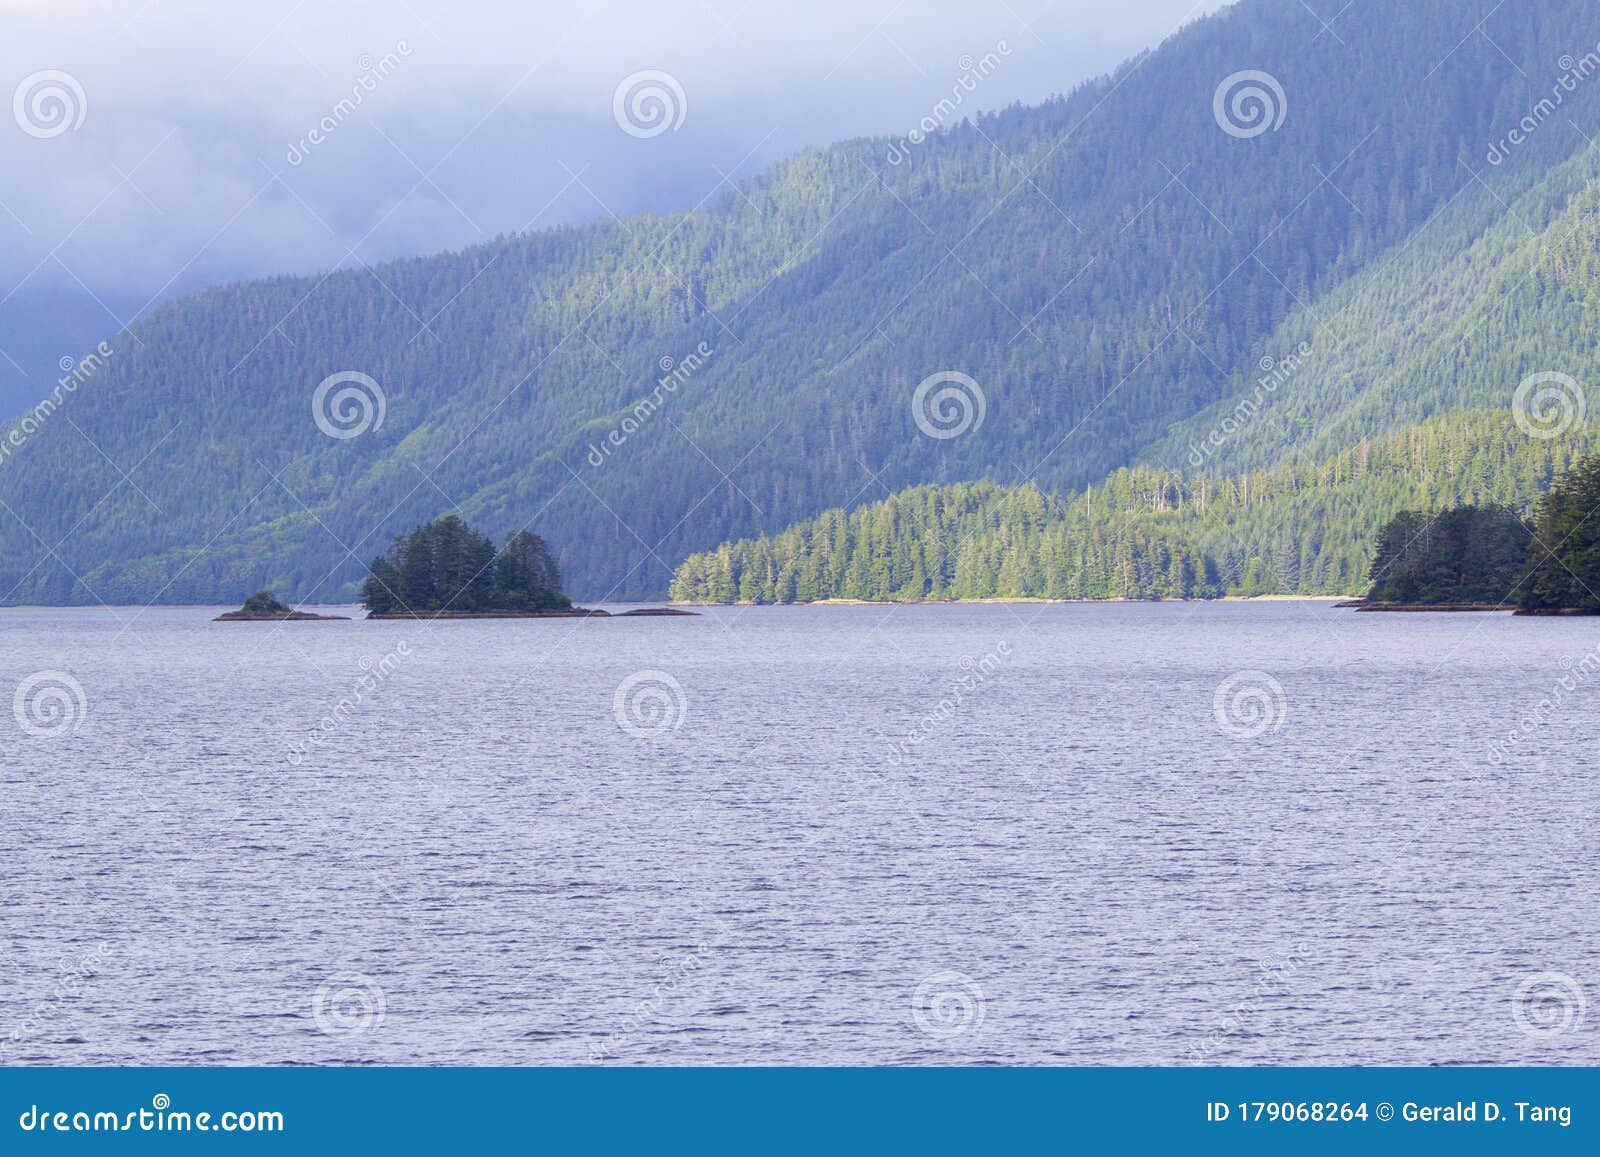 cloudy forest peril strait   845452